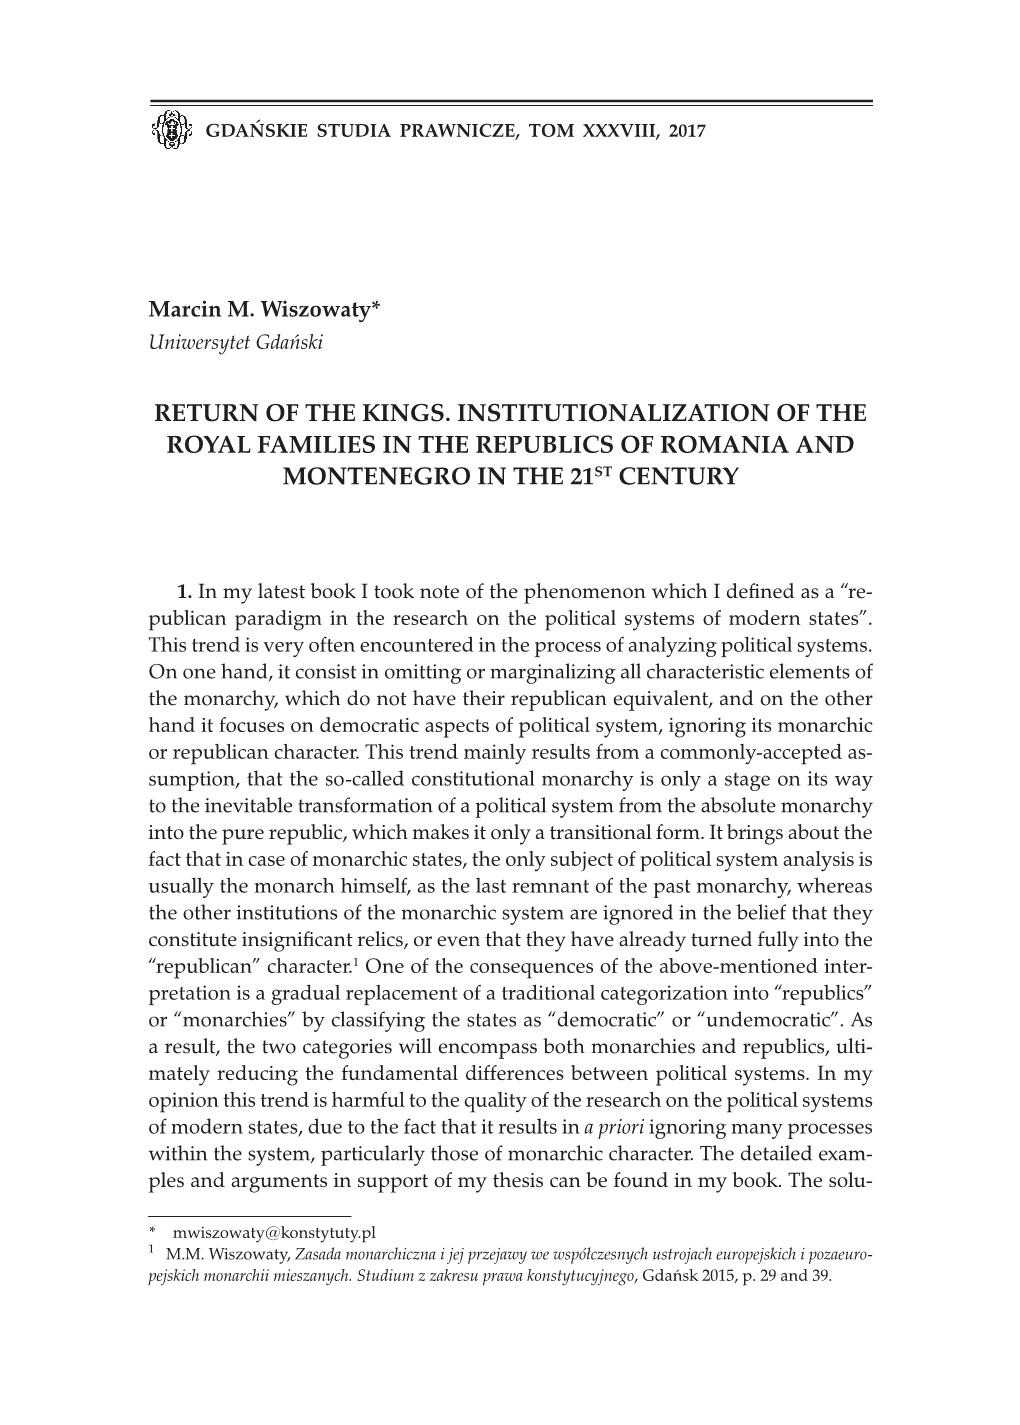 Return of the Kings. Institutionalization of the Royal Families in the Republics of Romania and Montenegro in the 21St Century